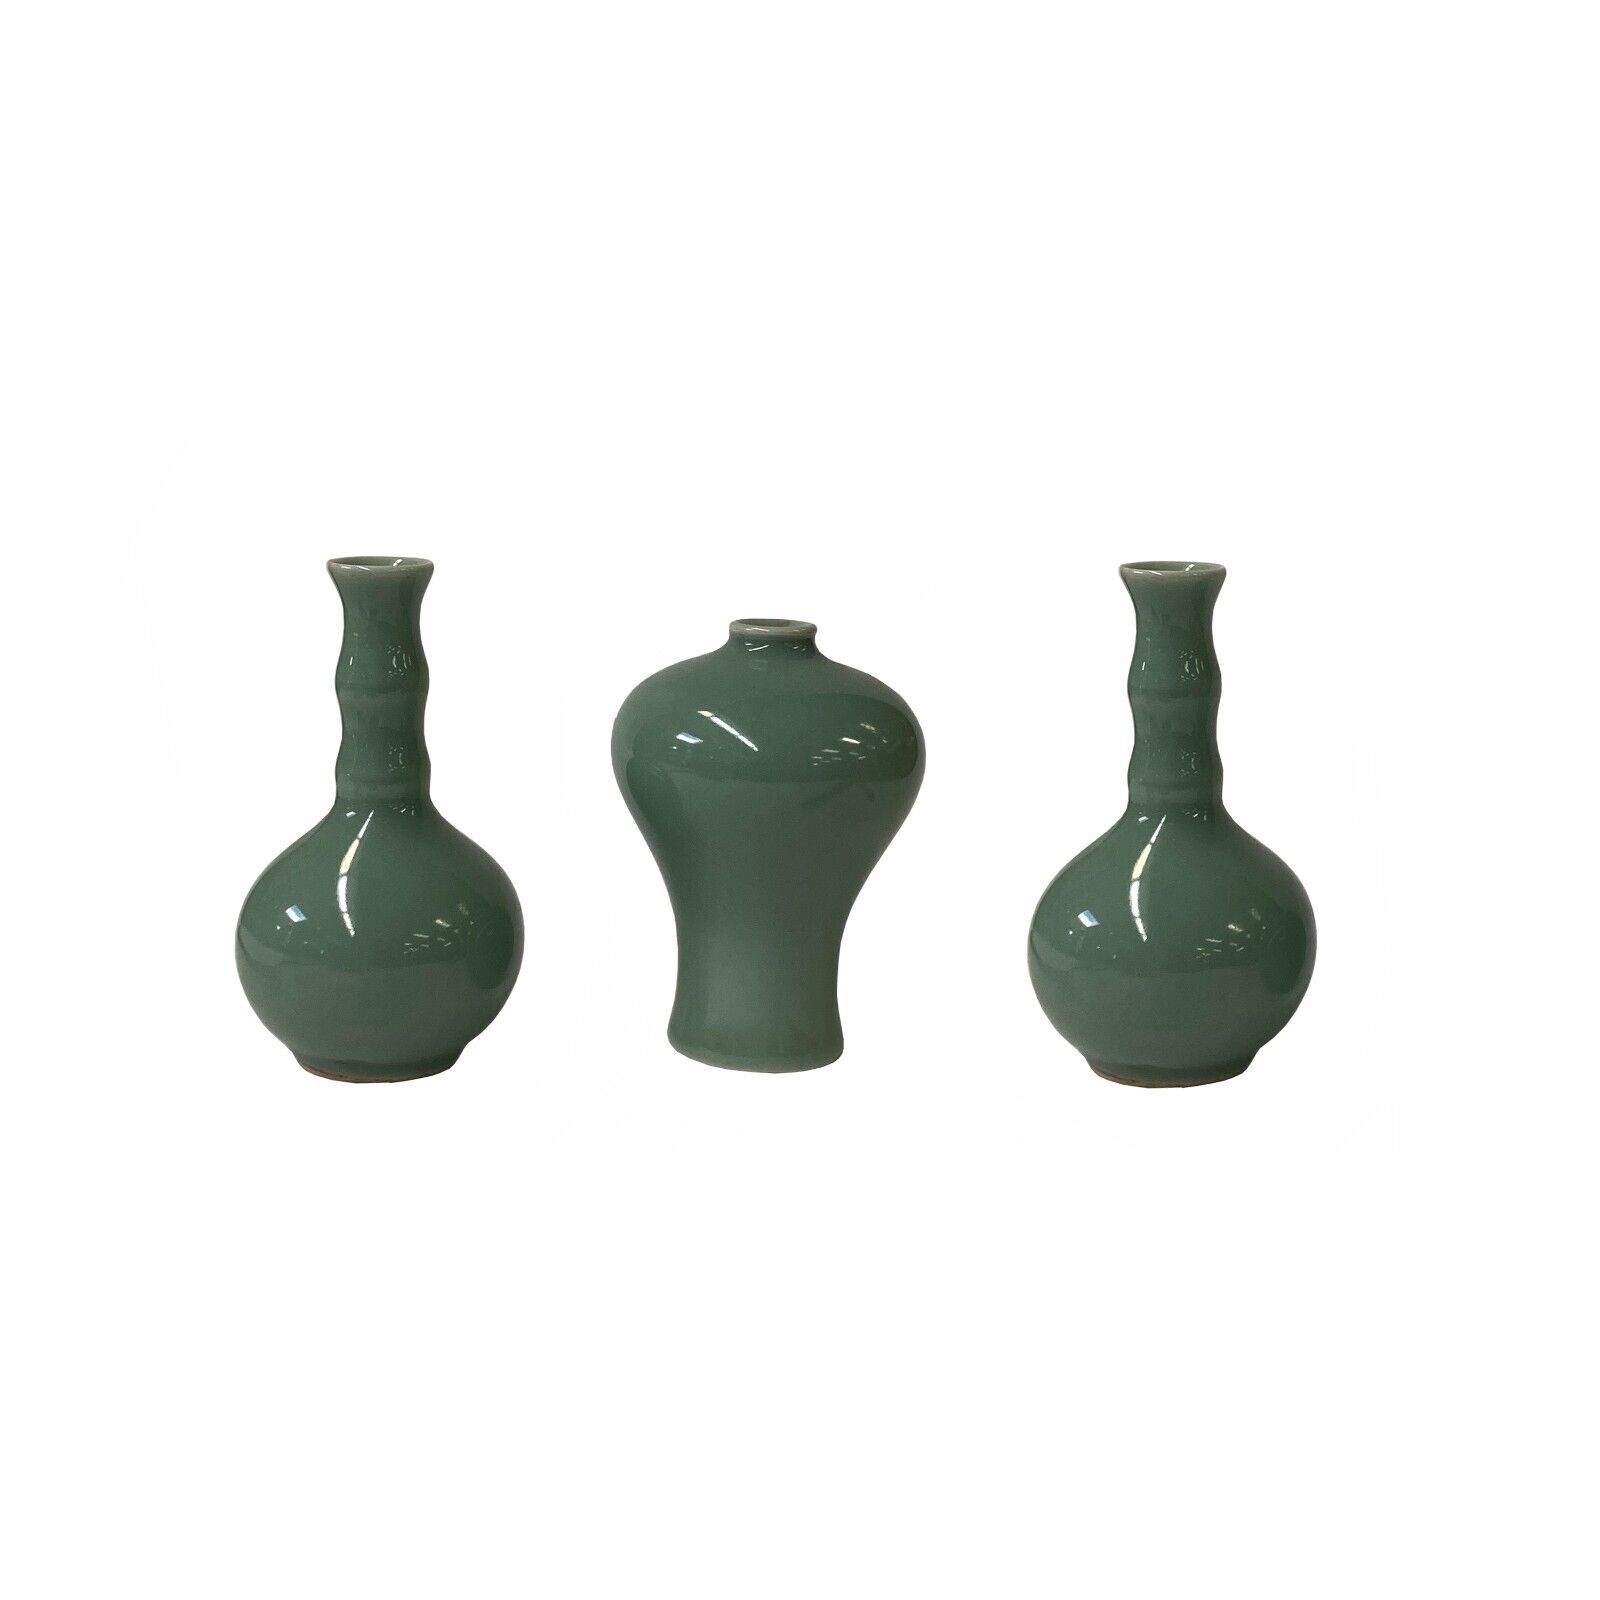 3 x Chinese Clay Ceramic Ware Wu Light Celadon Small Vase ws2836